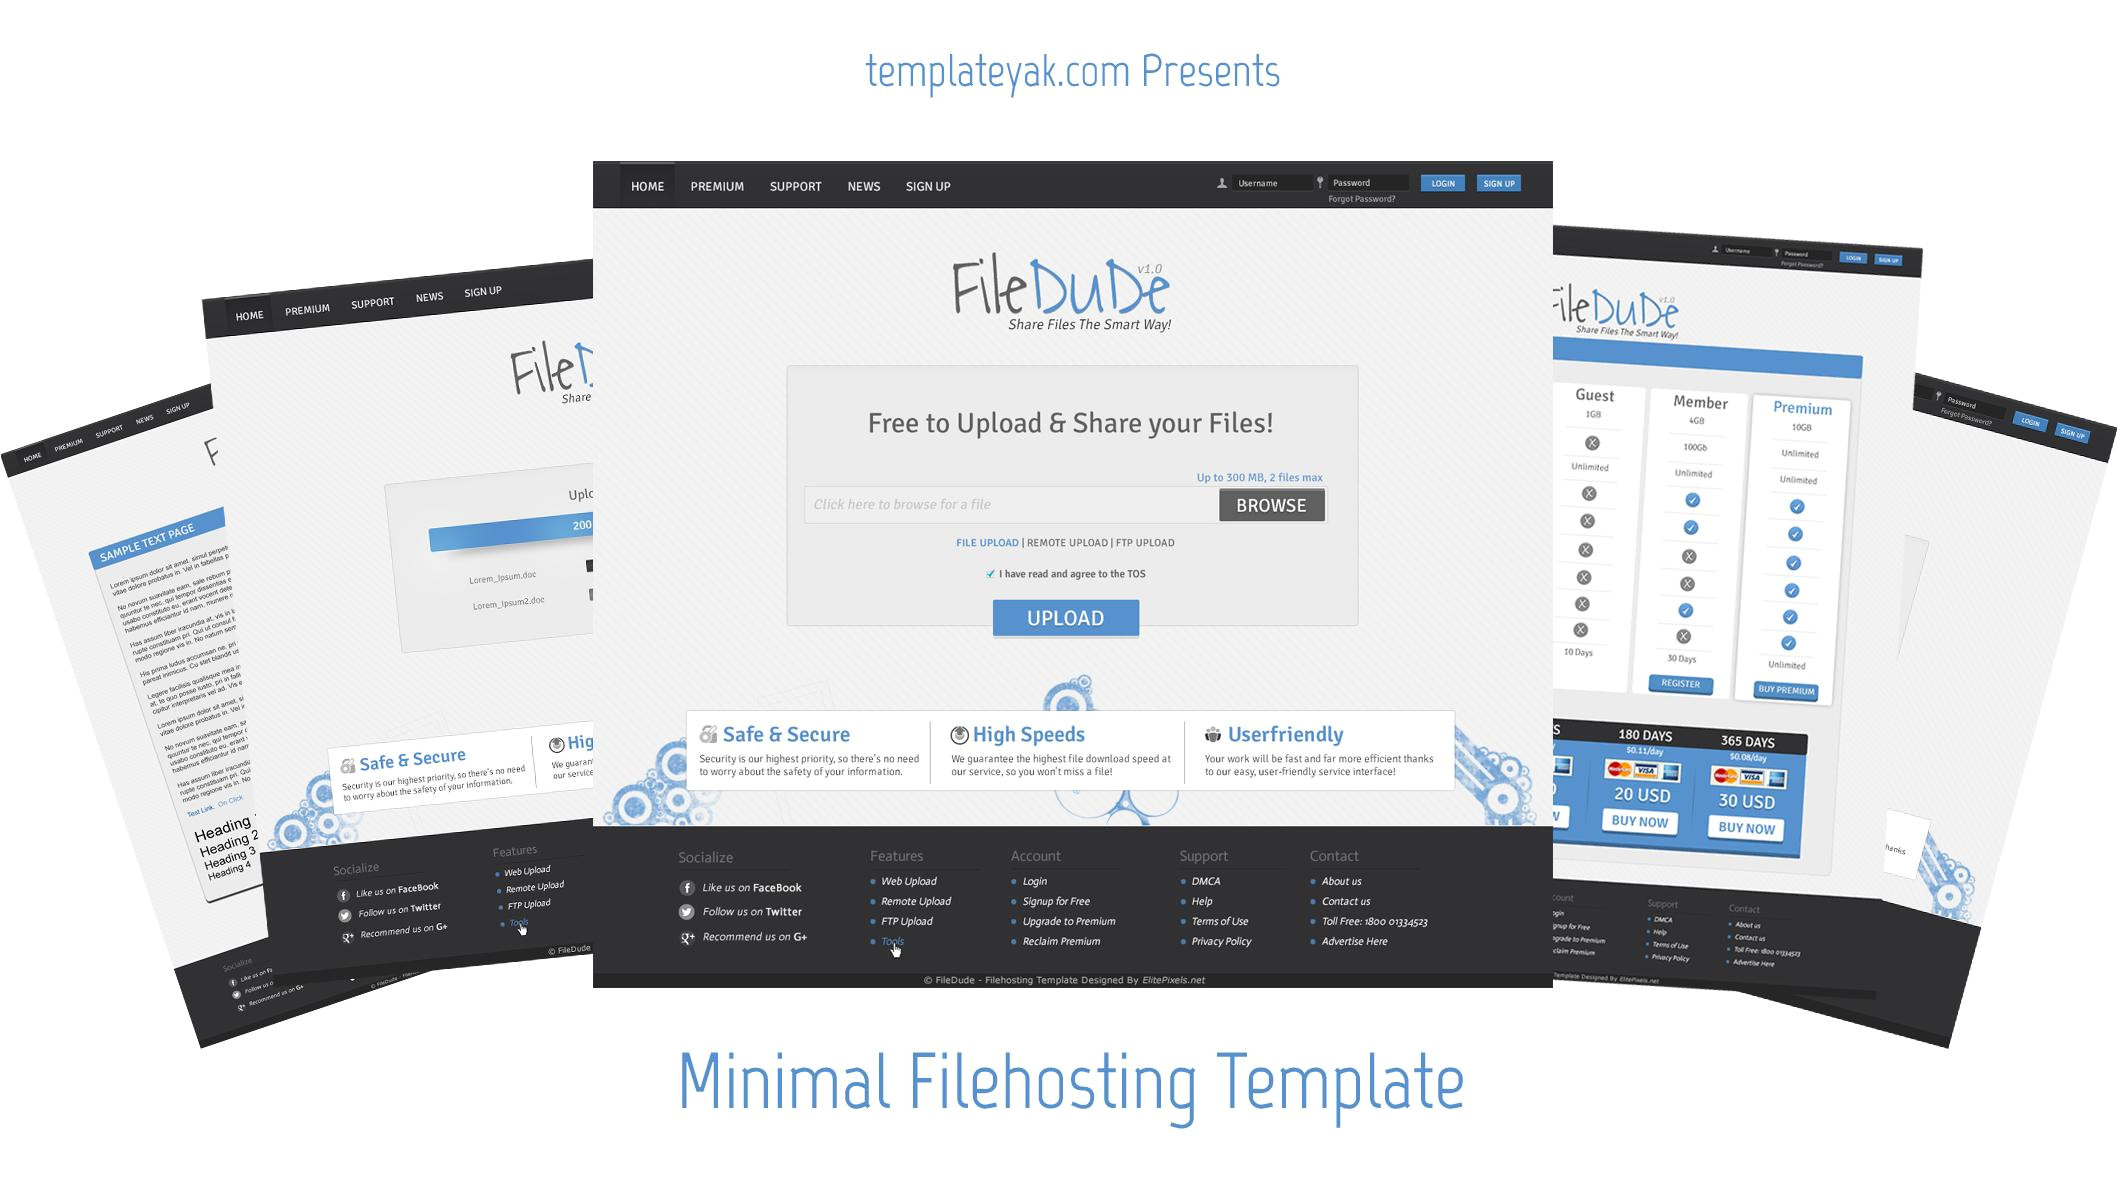 filedude file image hosting template now coded for xfs 2 1 161209